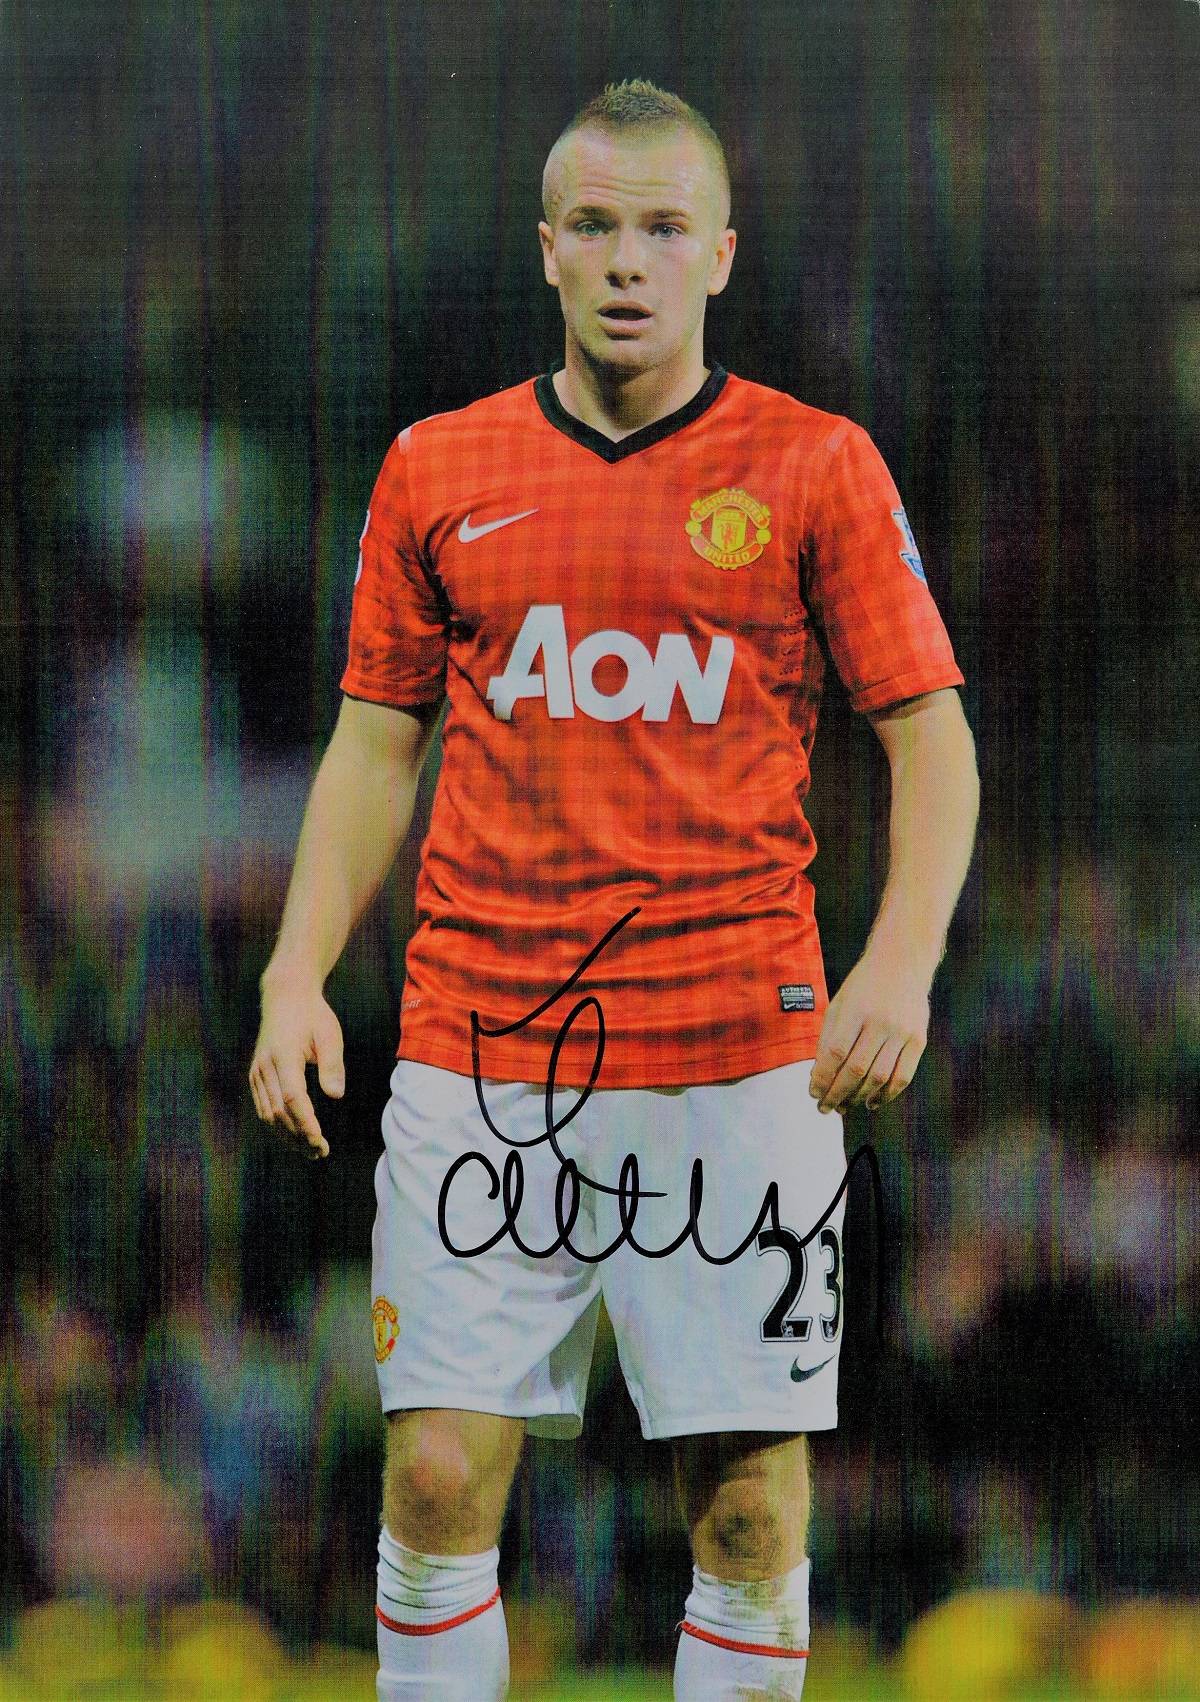 Footballer Tom Cleverley Manchester United 12x8 Signed Coloured Photo. Cleverley joined Manchester